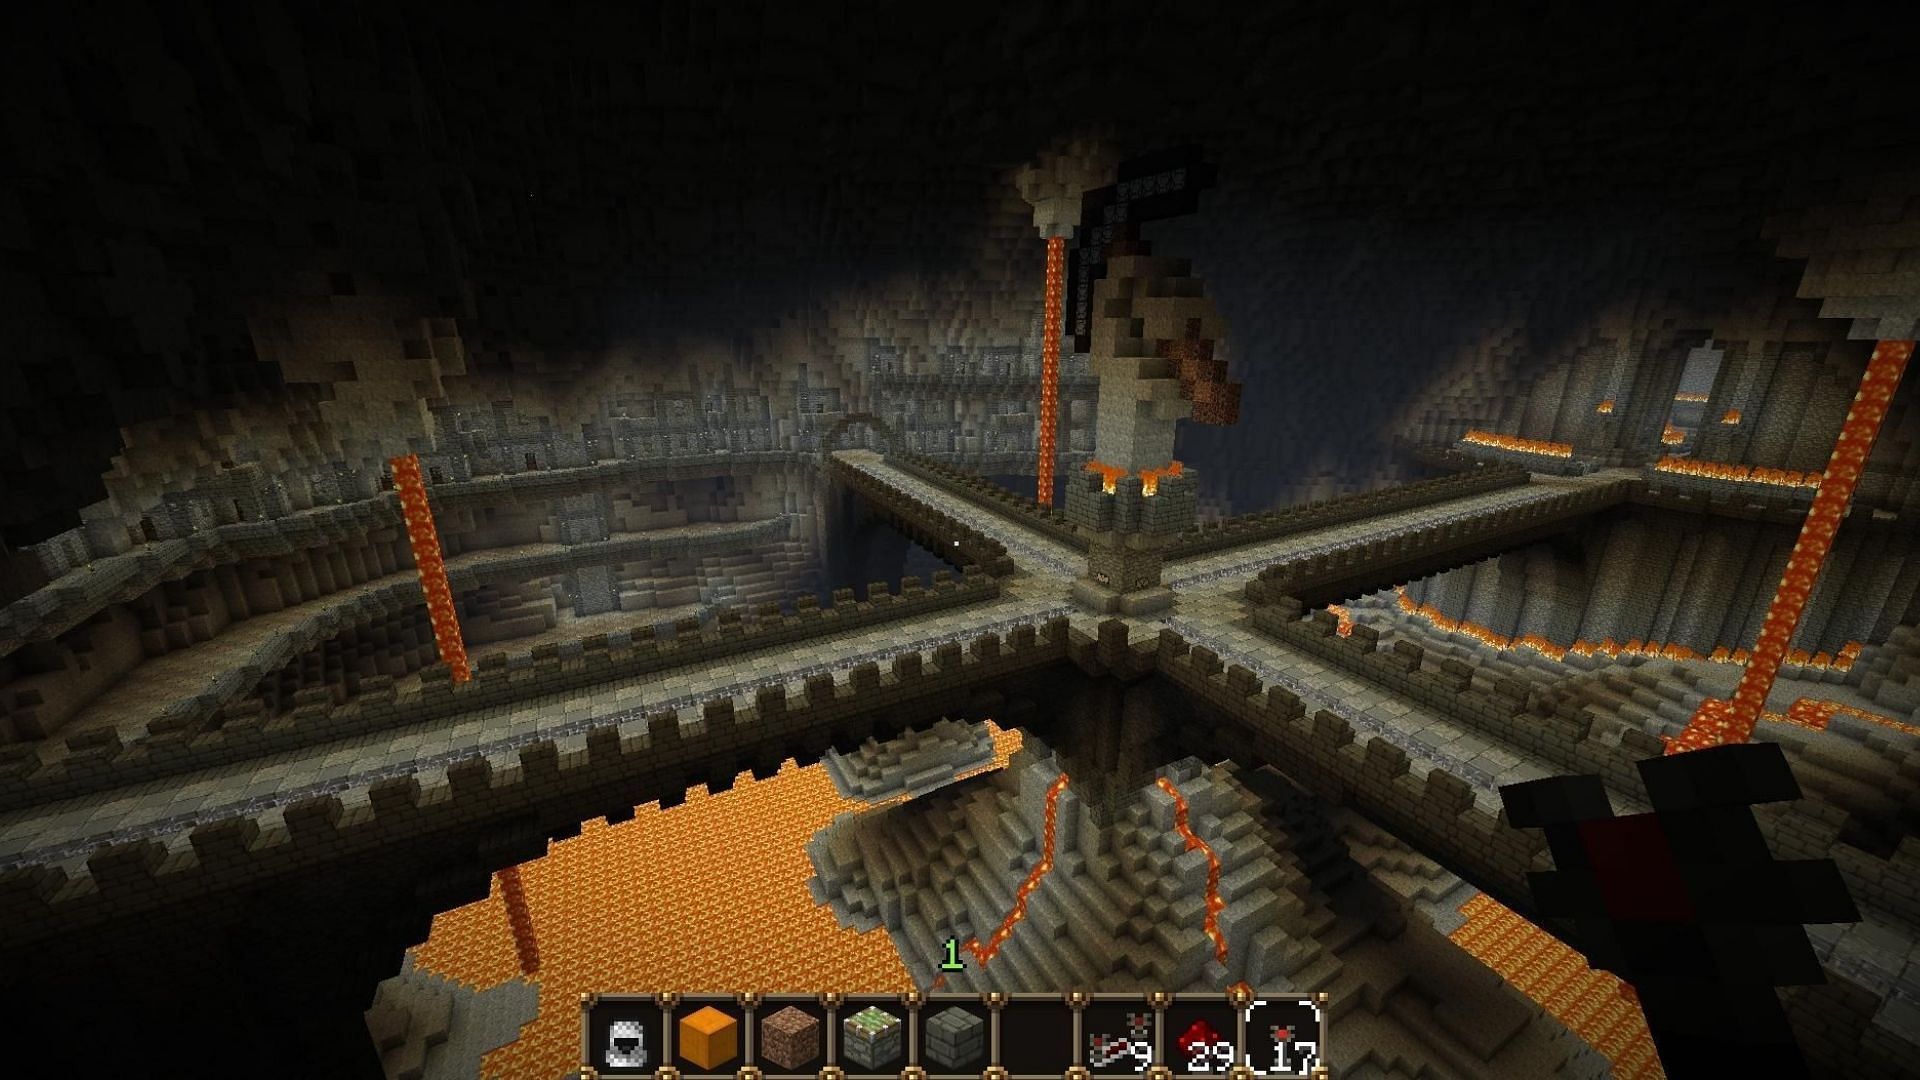 Massive caves can be converted into a beautiful dwarven city in Minecraft (Image via Pinterest)